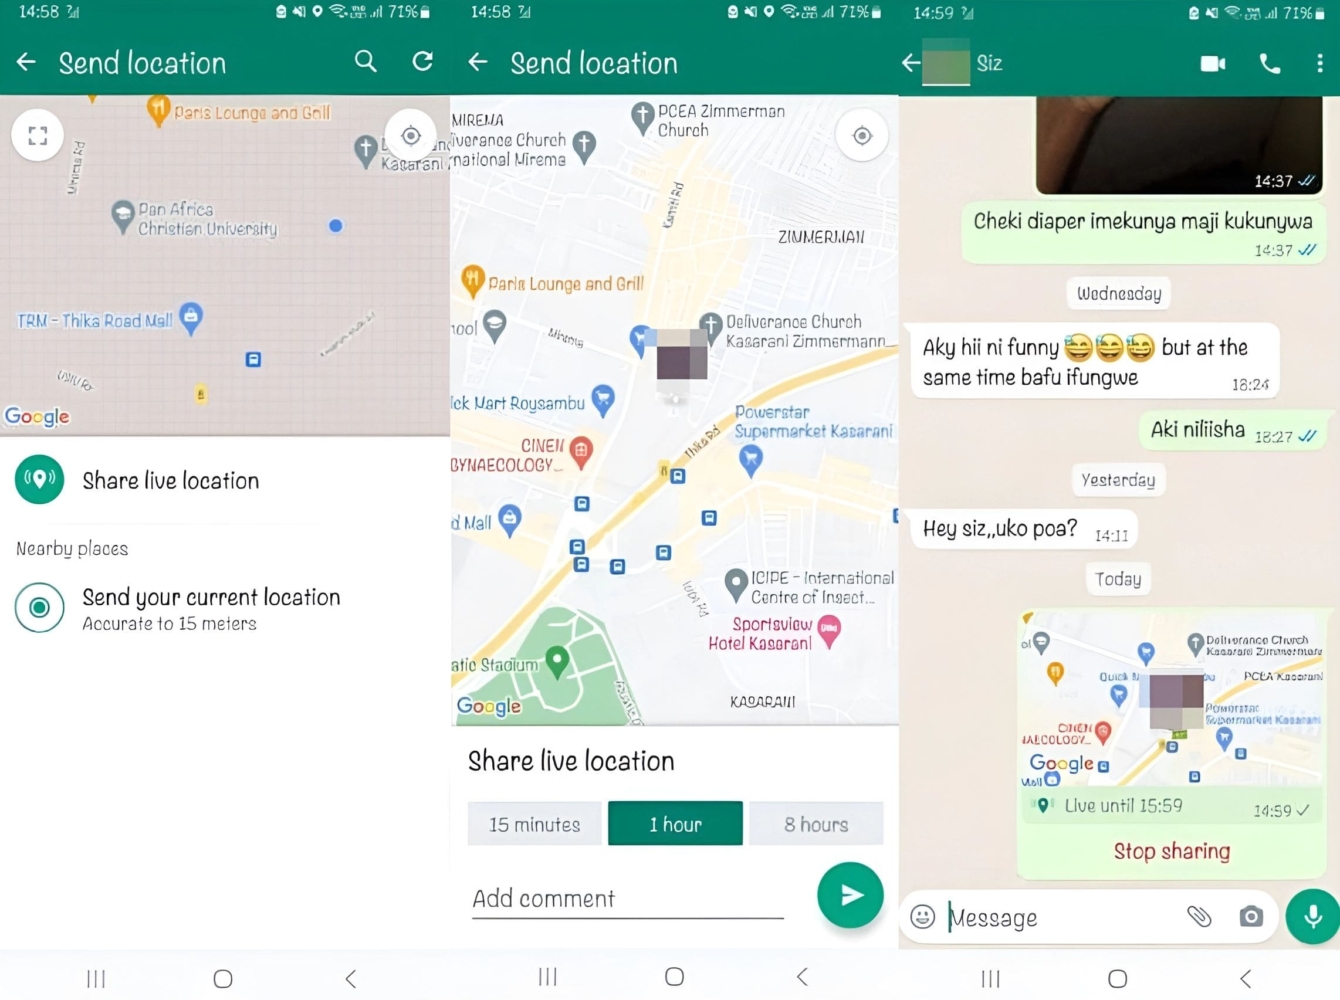 An image of live location sharing on a WhatsApp chat